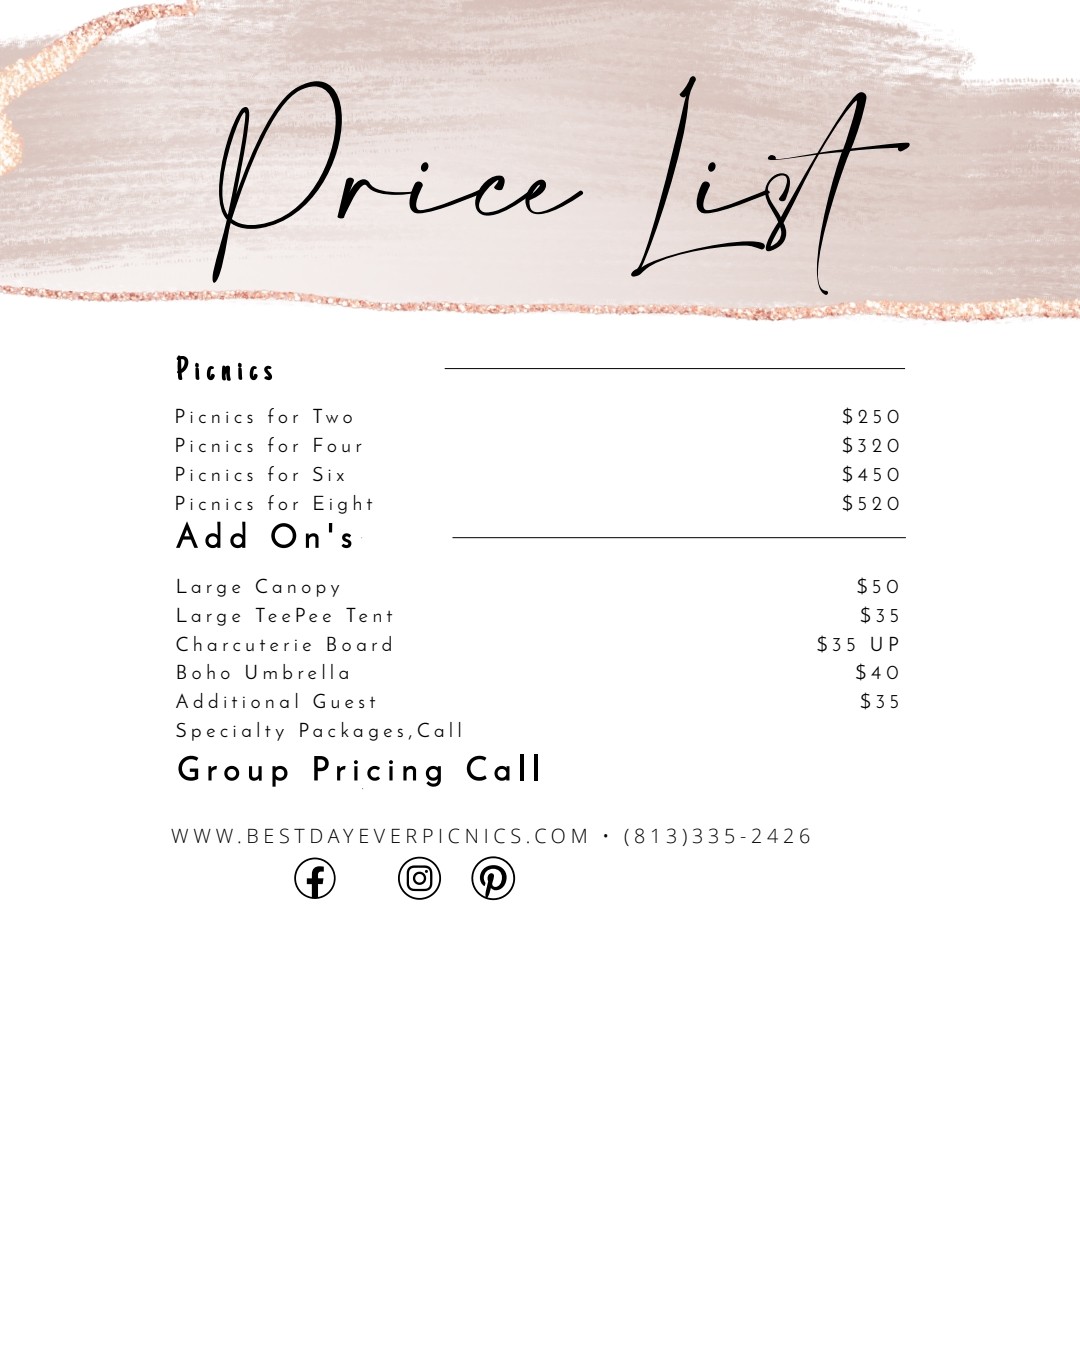 Pricing and Add-On List